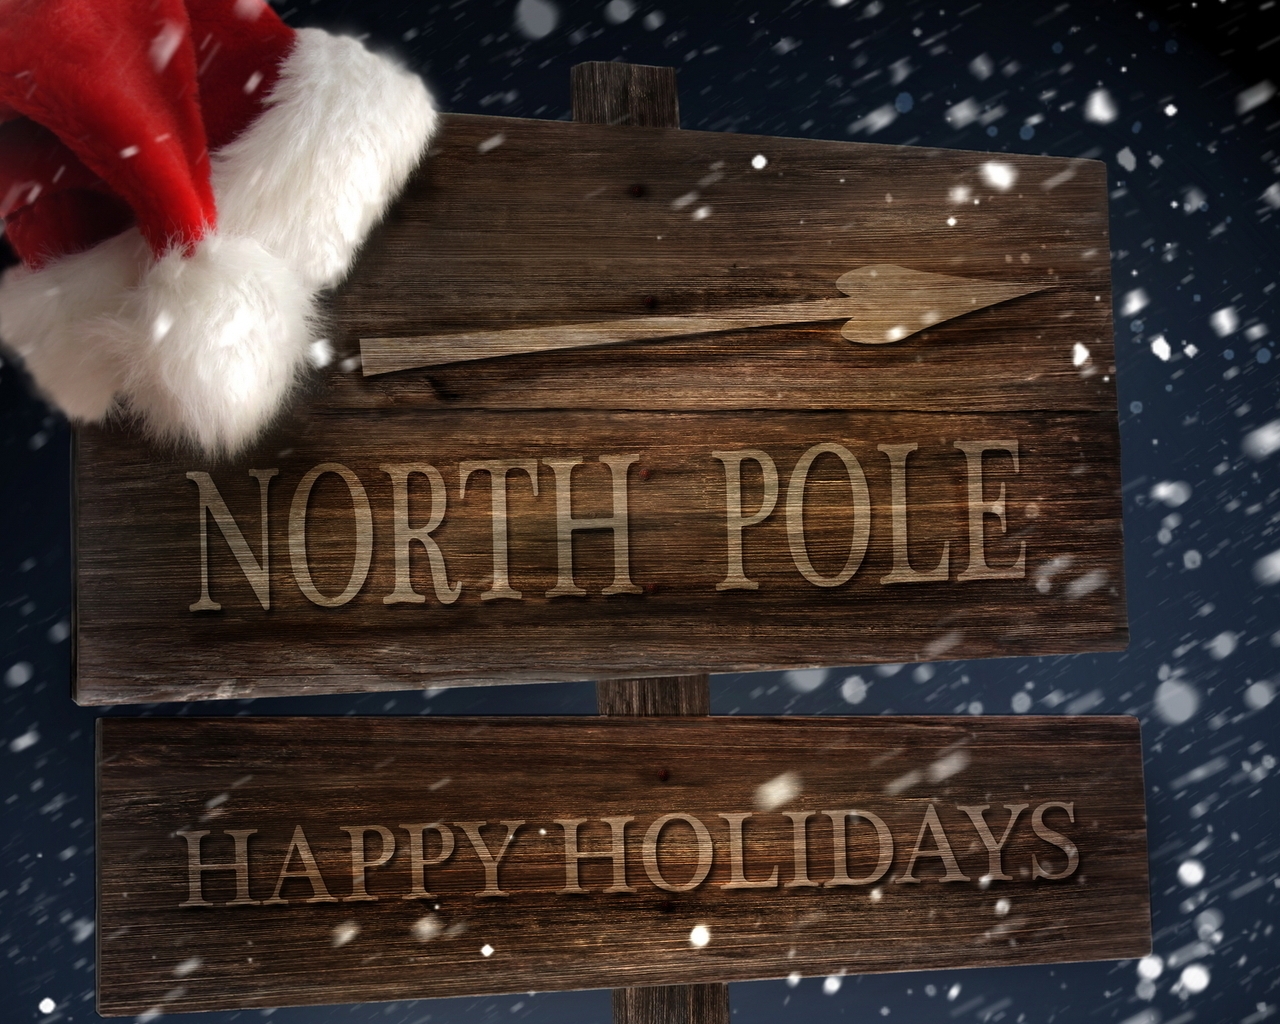 North Pole for 1280 x 1024 resolution